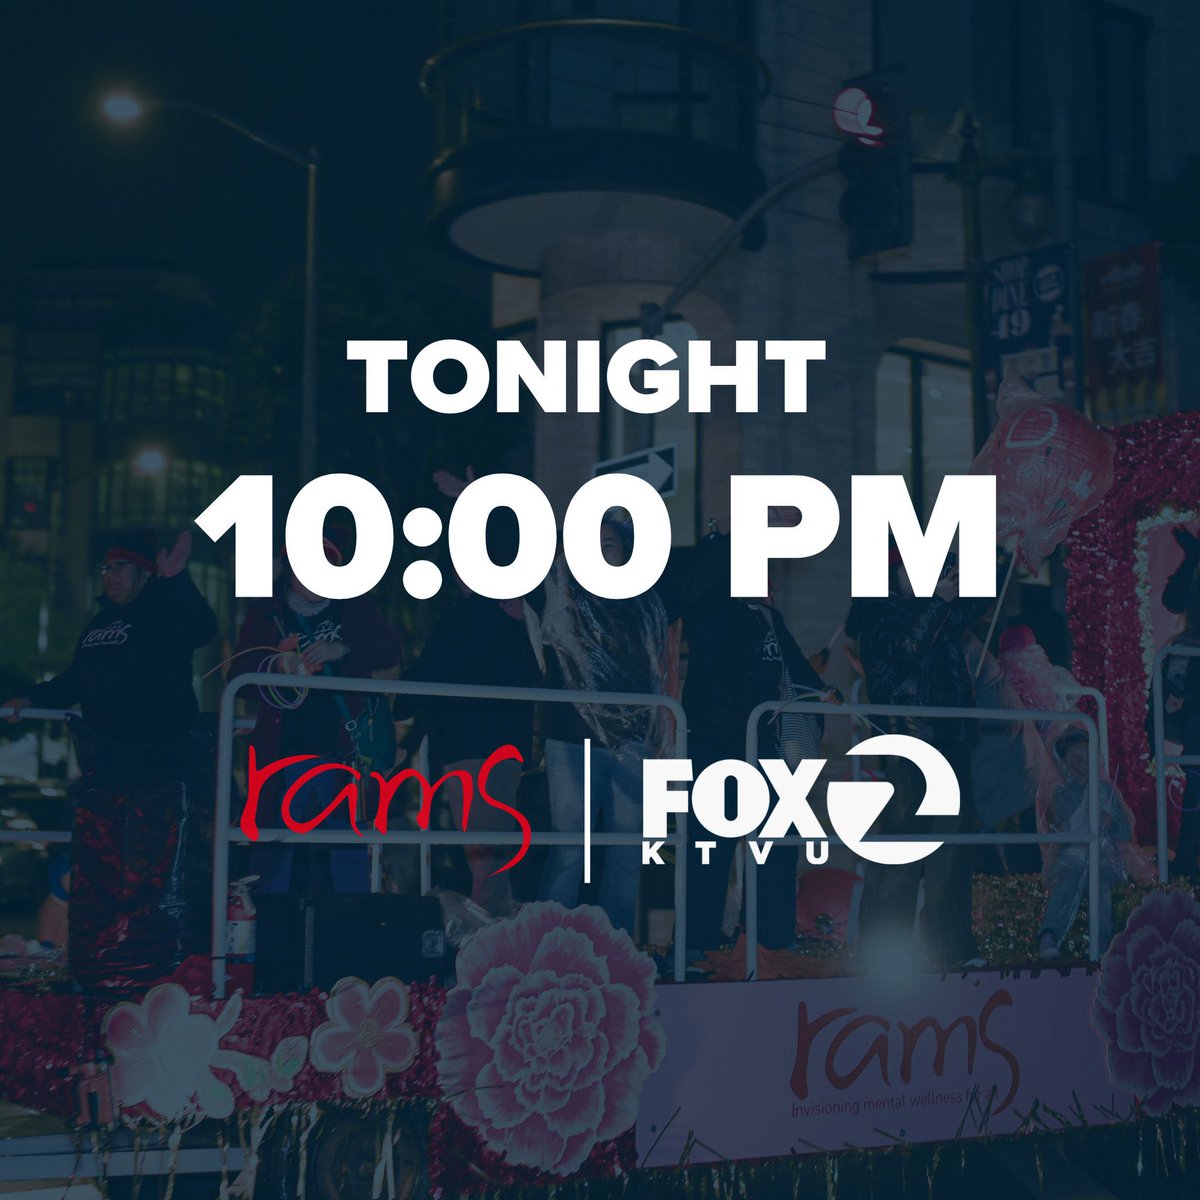 📣 RAMS will be aired on @KTVU tonight at 10:00 PM! Tune in to catch some amazing stories shared by our staff about why it's important to participate in the @chineseparade. 🔗 ktvu.com/live